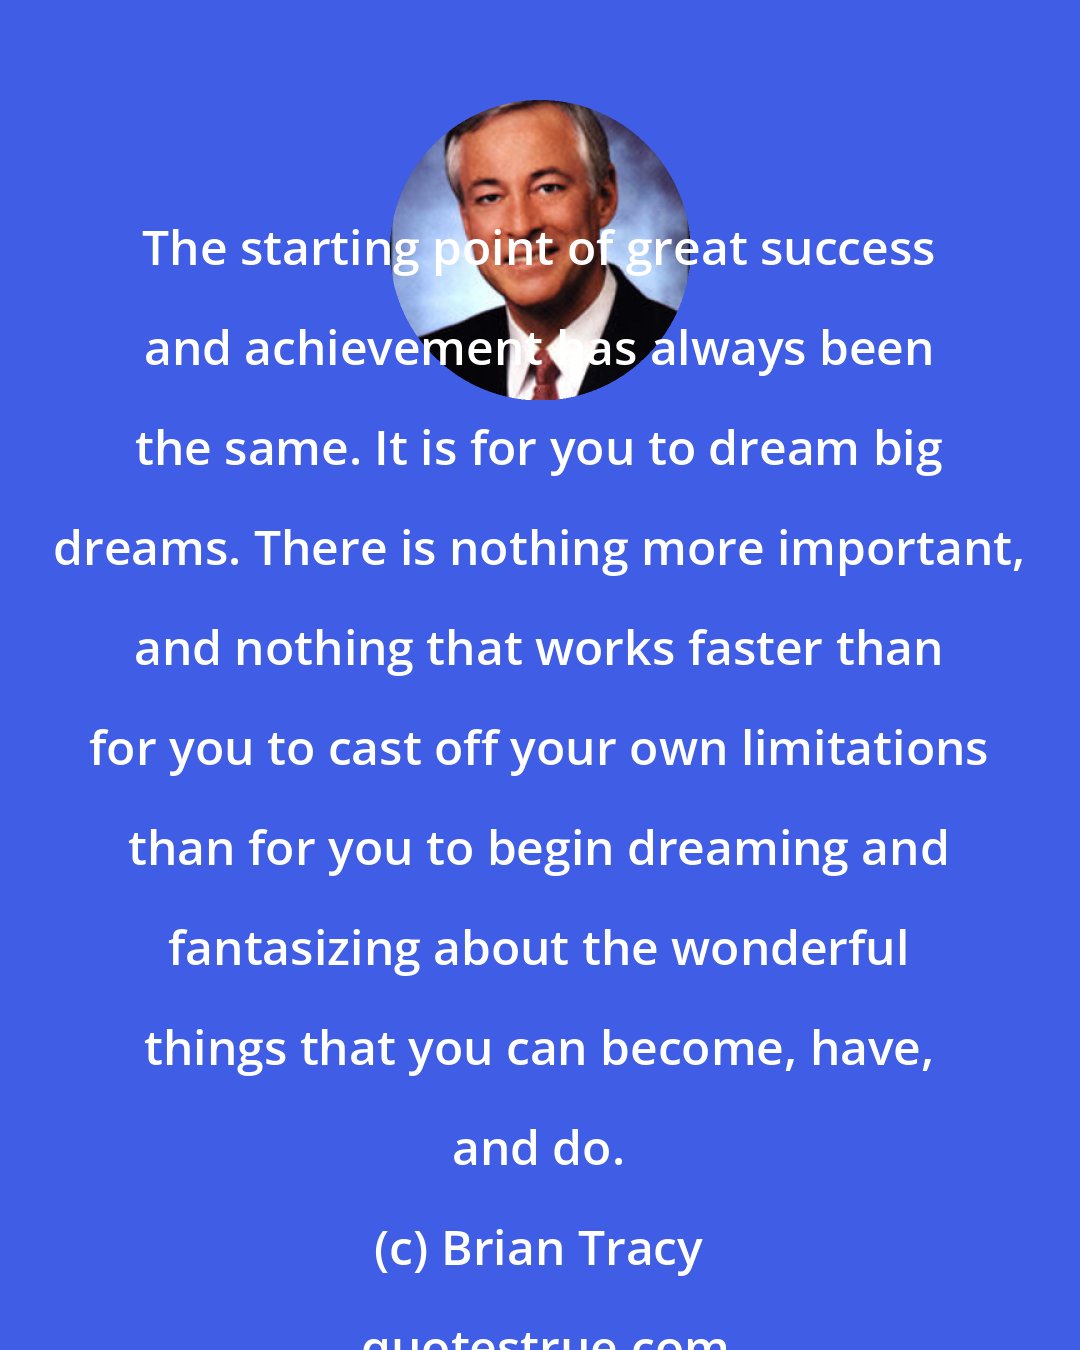 Brian Tracy: The starting point of great success and achievement has always been the same. It is for you to dream big dreams. There is nothing more important, and nothing that works faster than for you to cast off your own limitations than for you to begin dreaming and fantasizing about the wonderful things that you can become, have, and do.